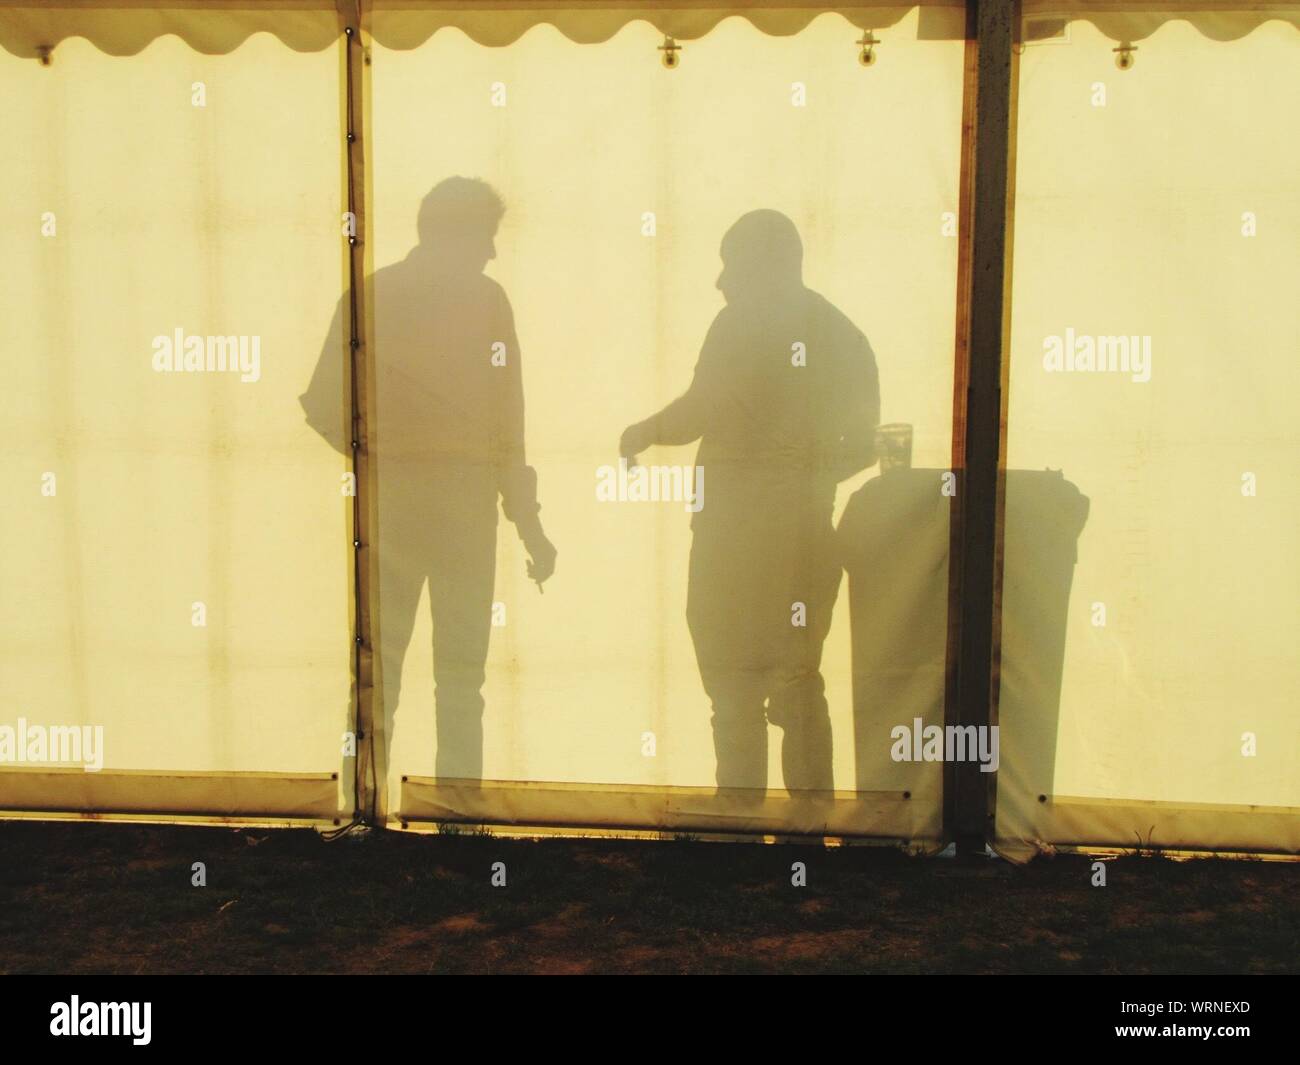 Shadows Of Men Communicating In Tent Stock Photo